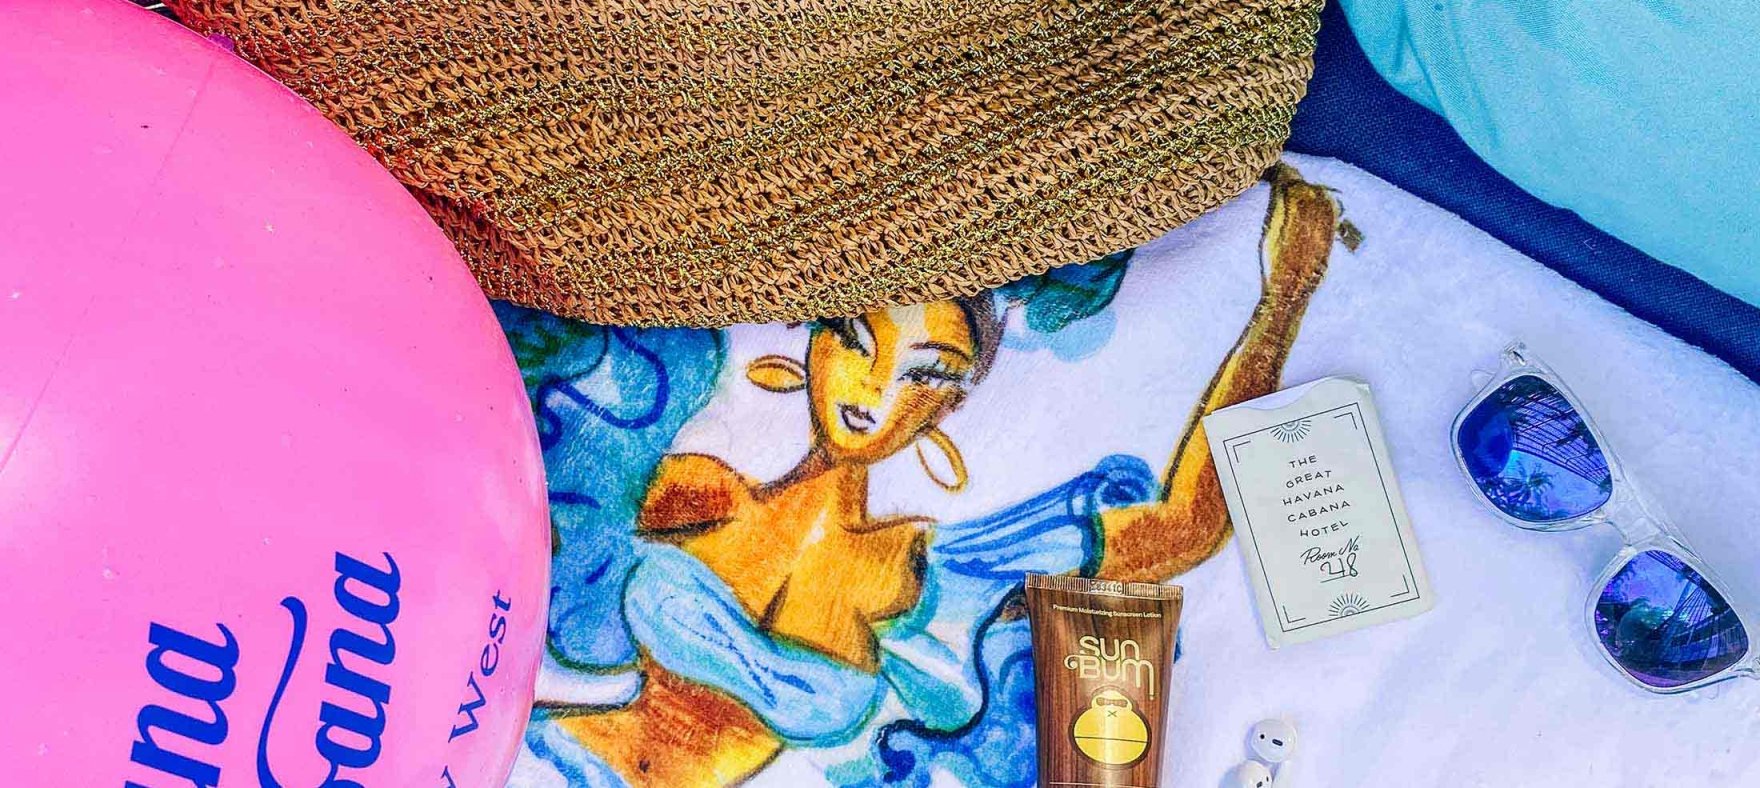 Beach ball next to a woven bag, sunscreen, EarPods, cards and a sunglass placed on a fabric with a painting of a dancer